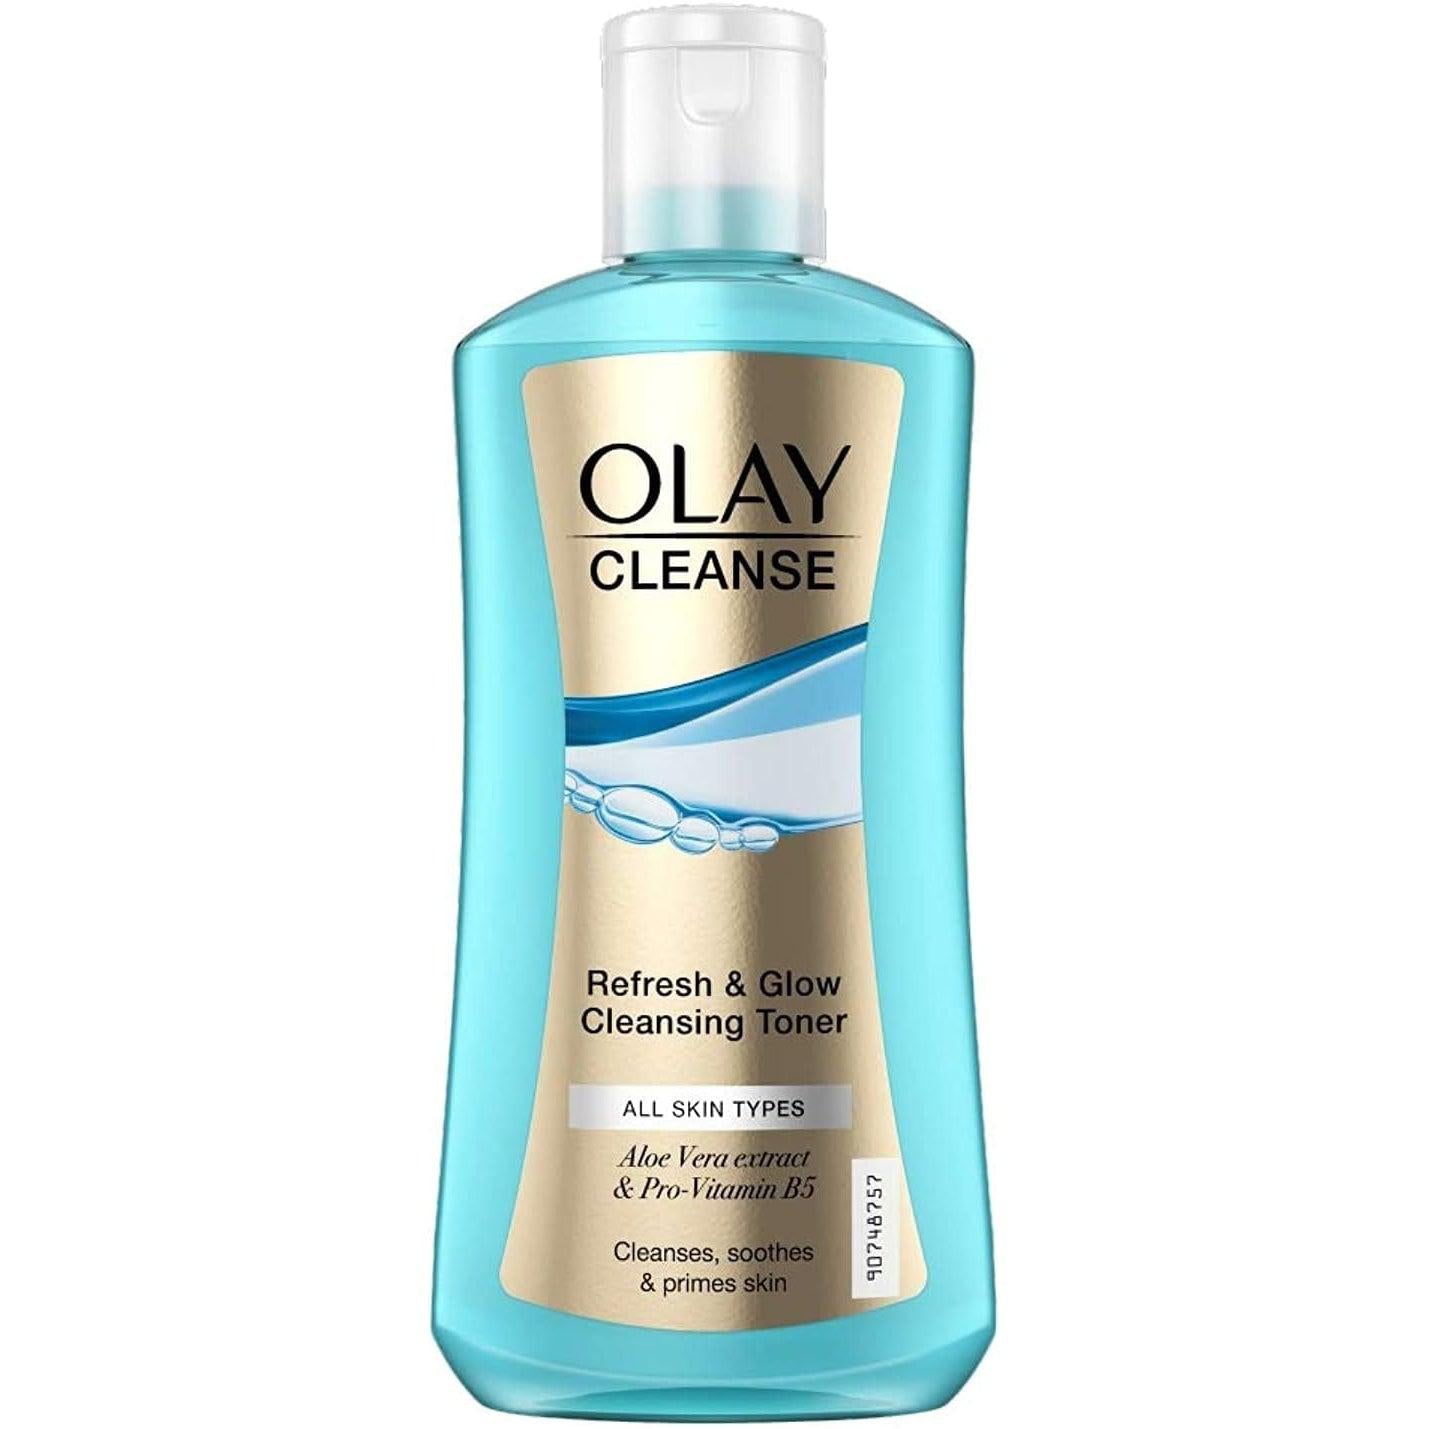 Olay Cleanse Refresh & Glow Cleansing Toner, All Skin Types, 200 ml - Healthxpress.ie